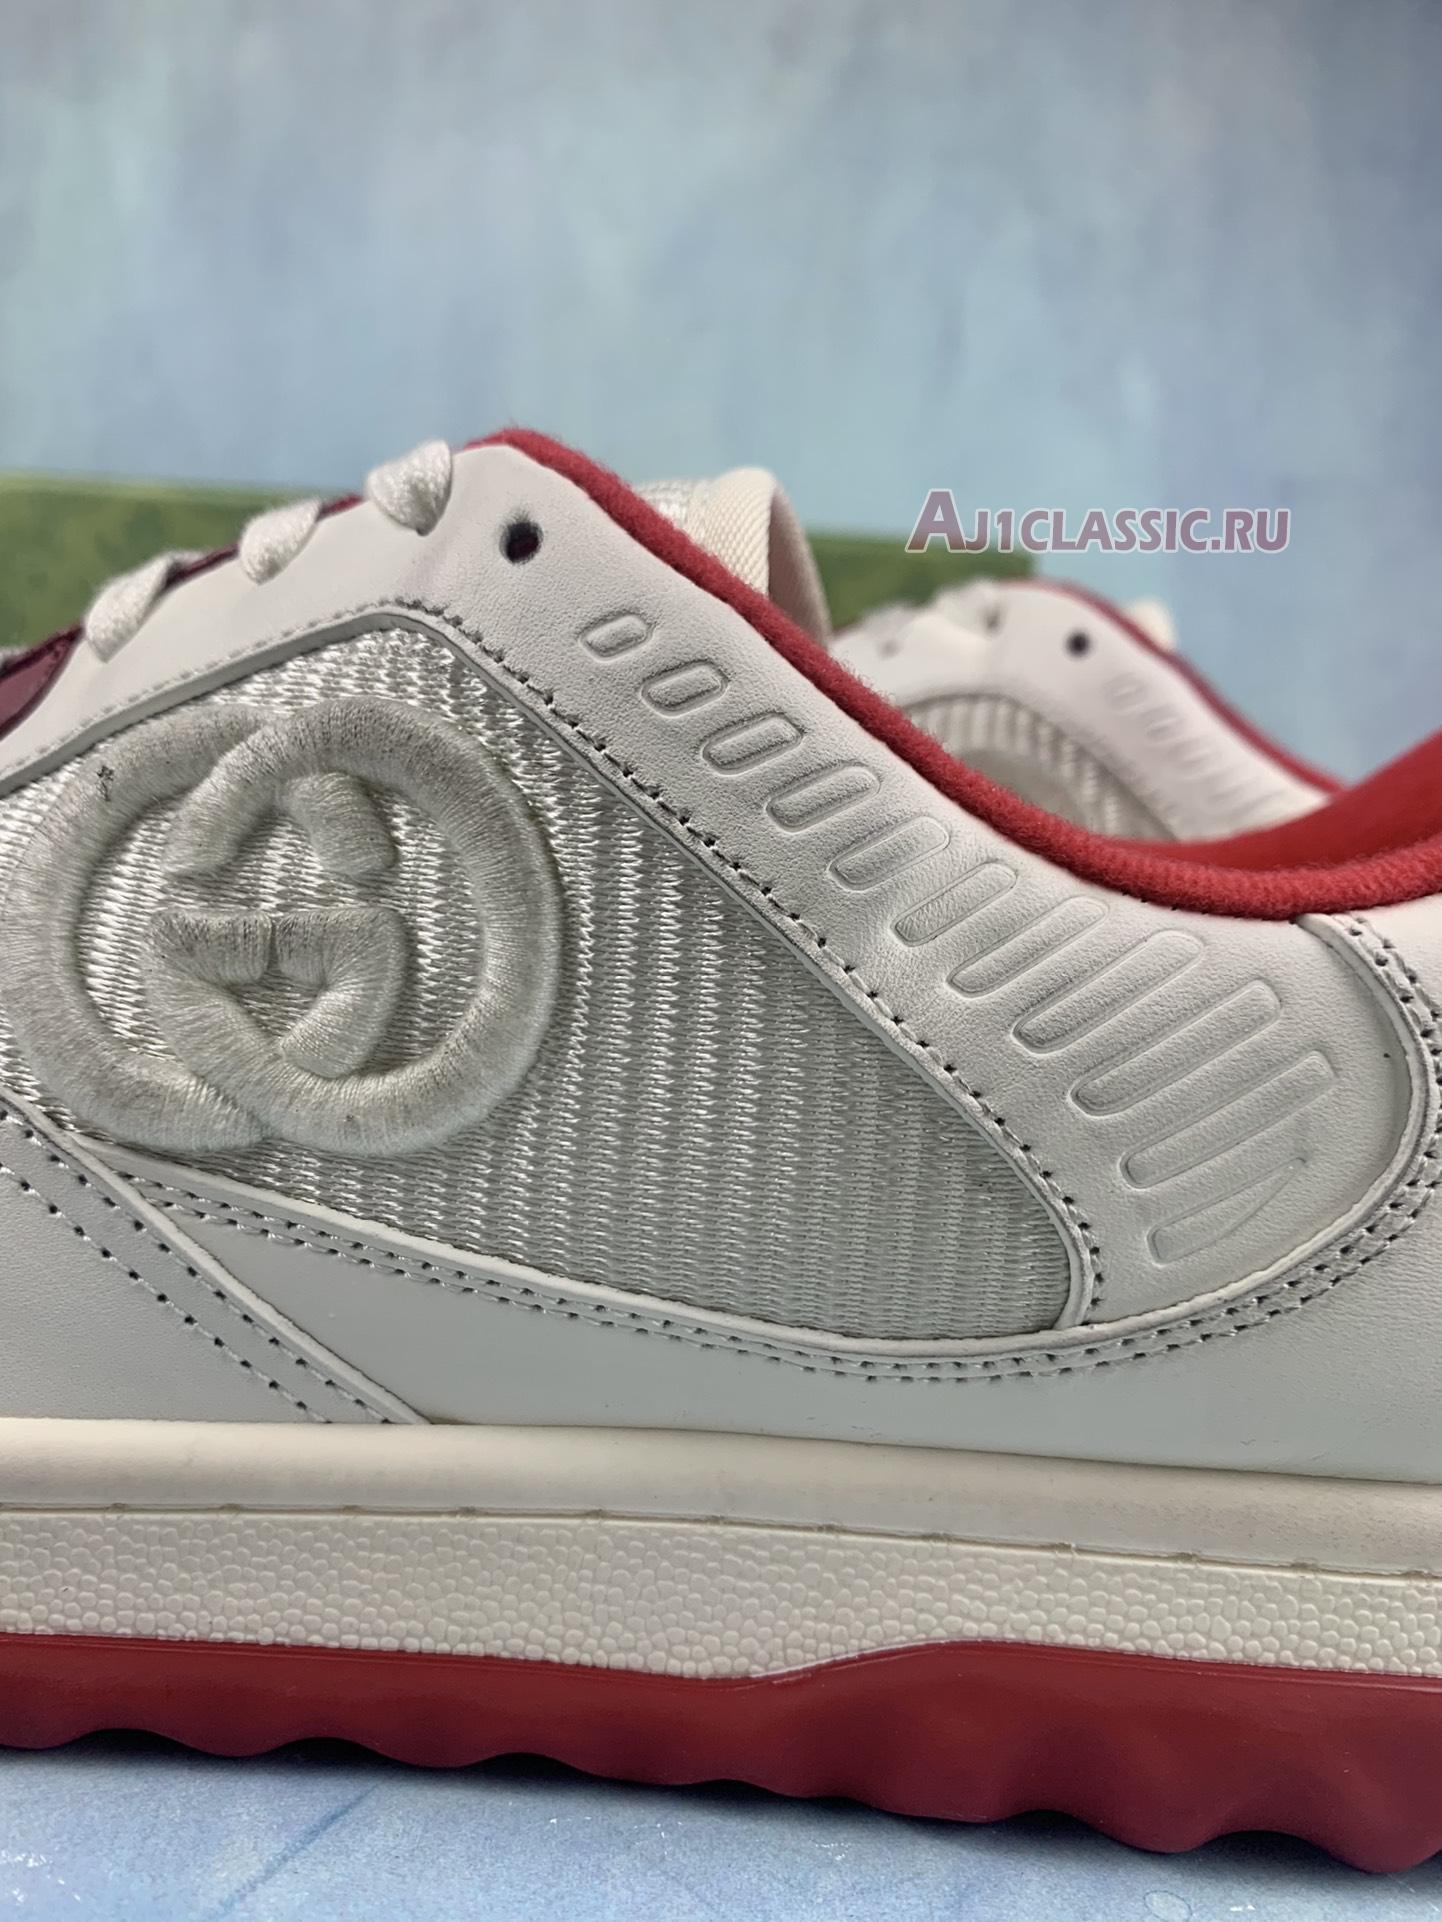 Gucci MAC80 Sneaker "Off White Red" 749896 AAB79 9150